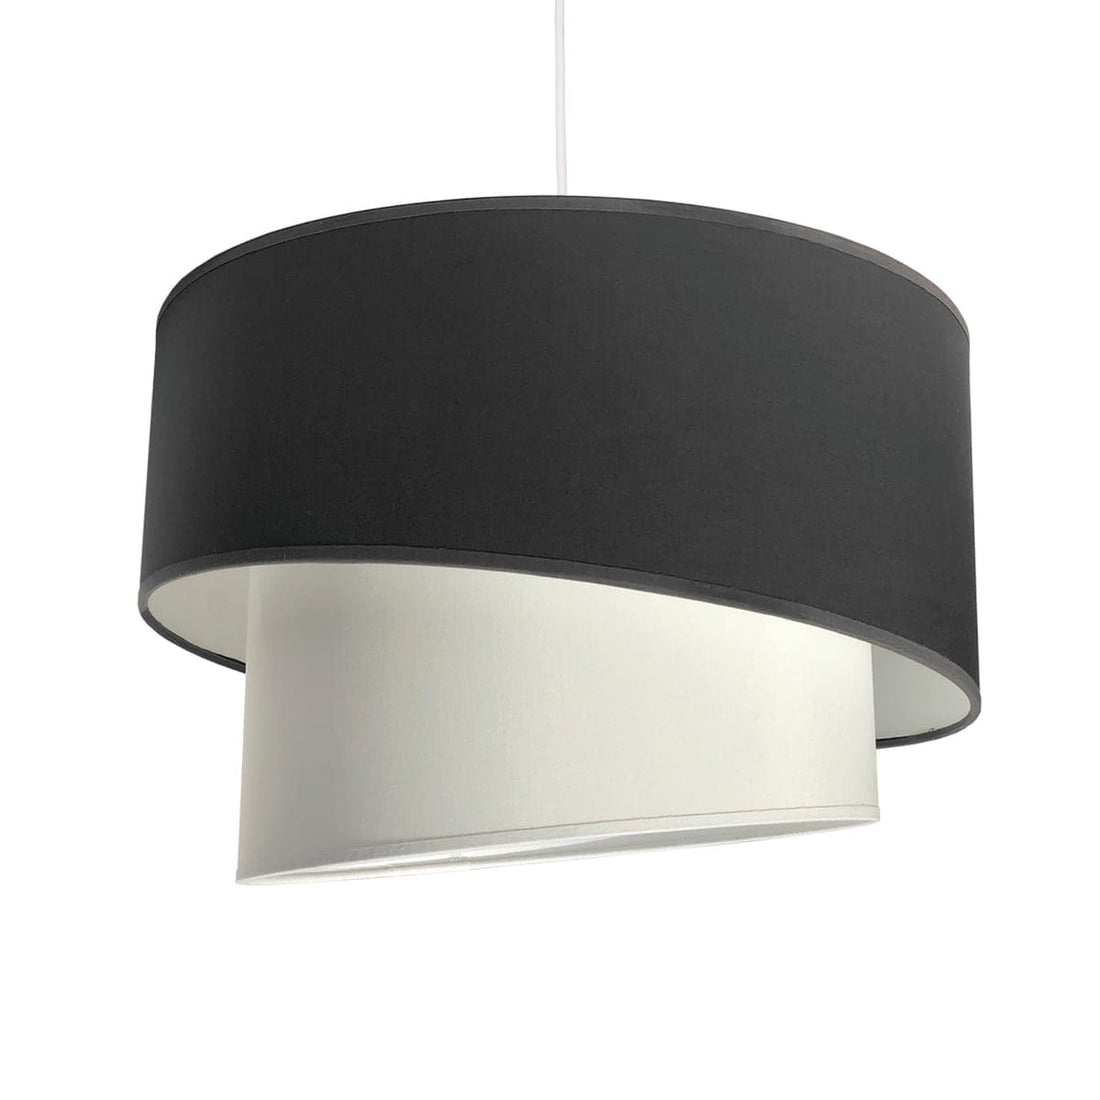 CHANDELIER DOUBLE BIAS FABRIC ANTHRACITE D40 E27=60W - best price from Maltashopper.com BR420005847